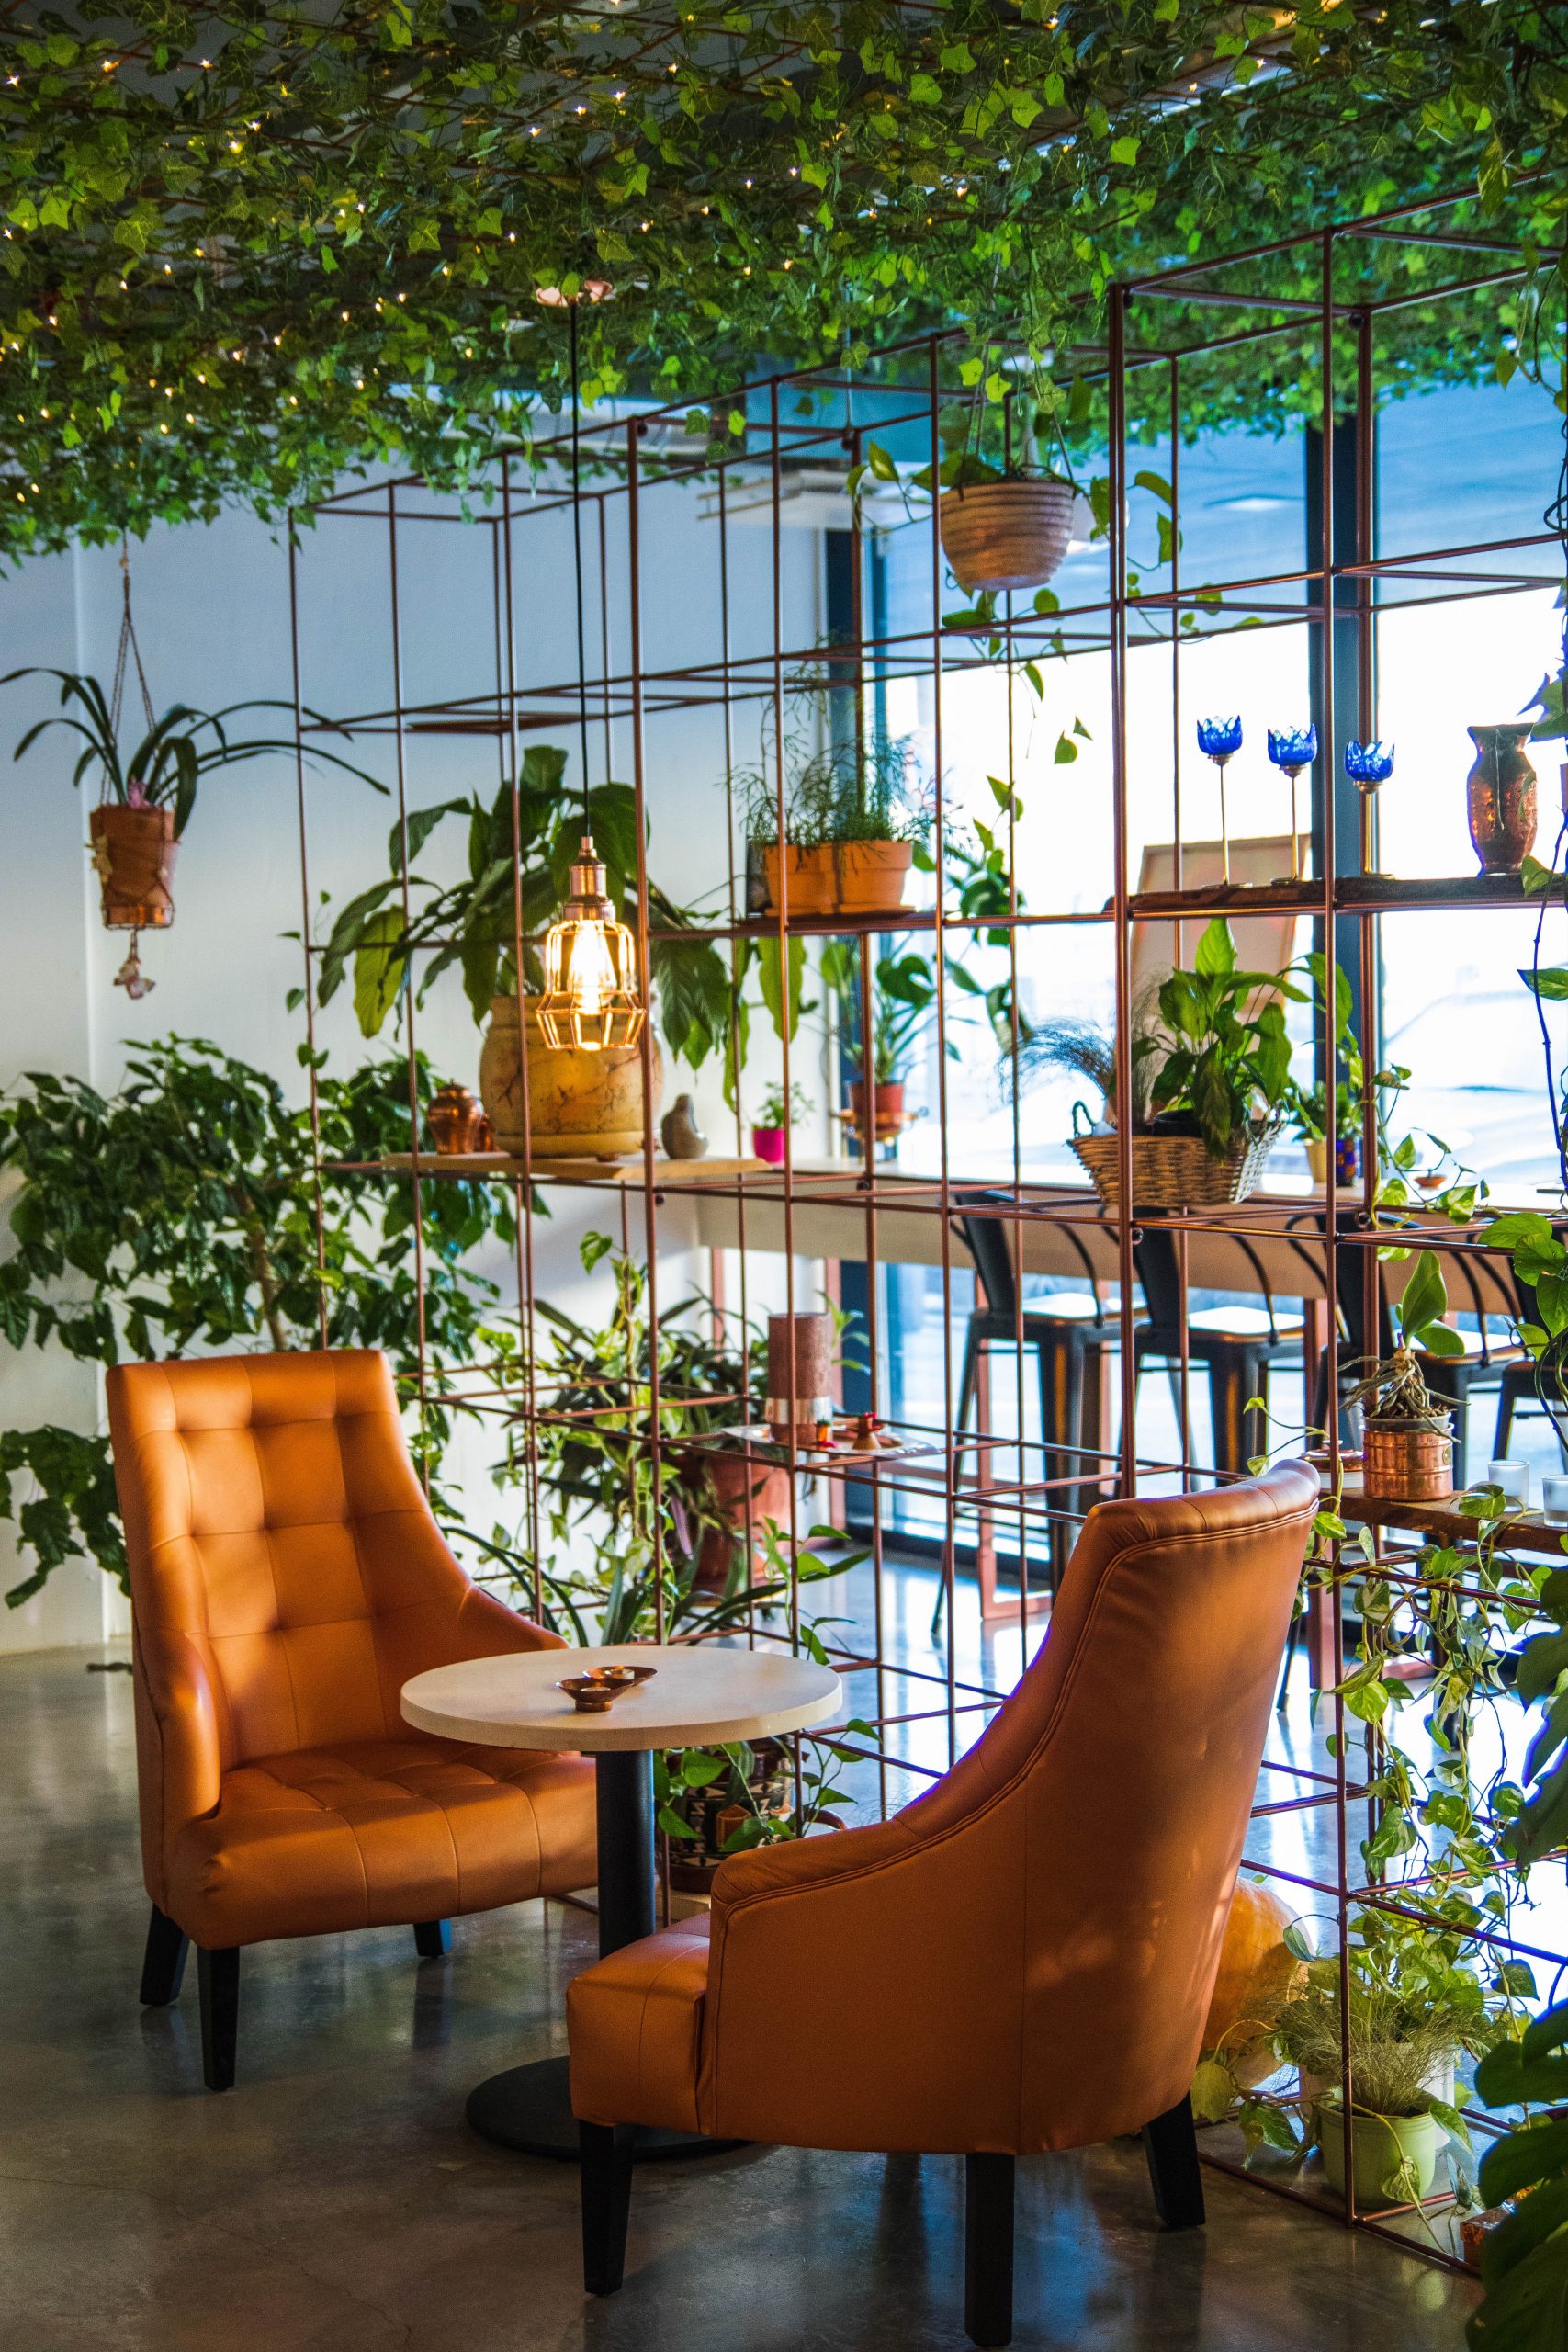 The post pandemic office will be filled with light and plants when employees return in 2021. Phjoto: Valeria Boltneva plant stylist